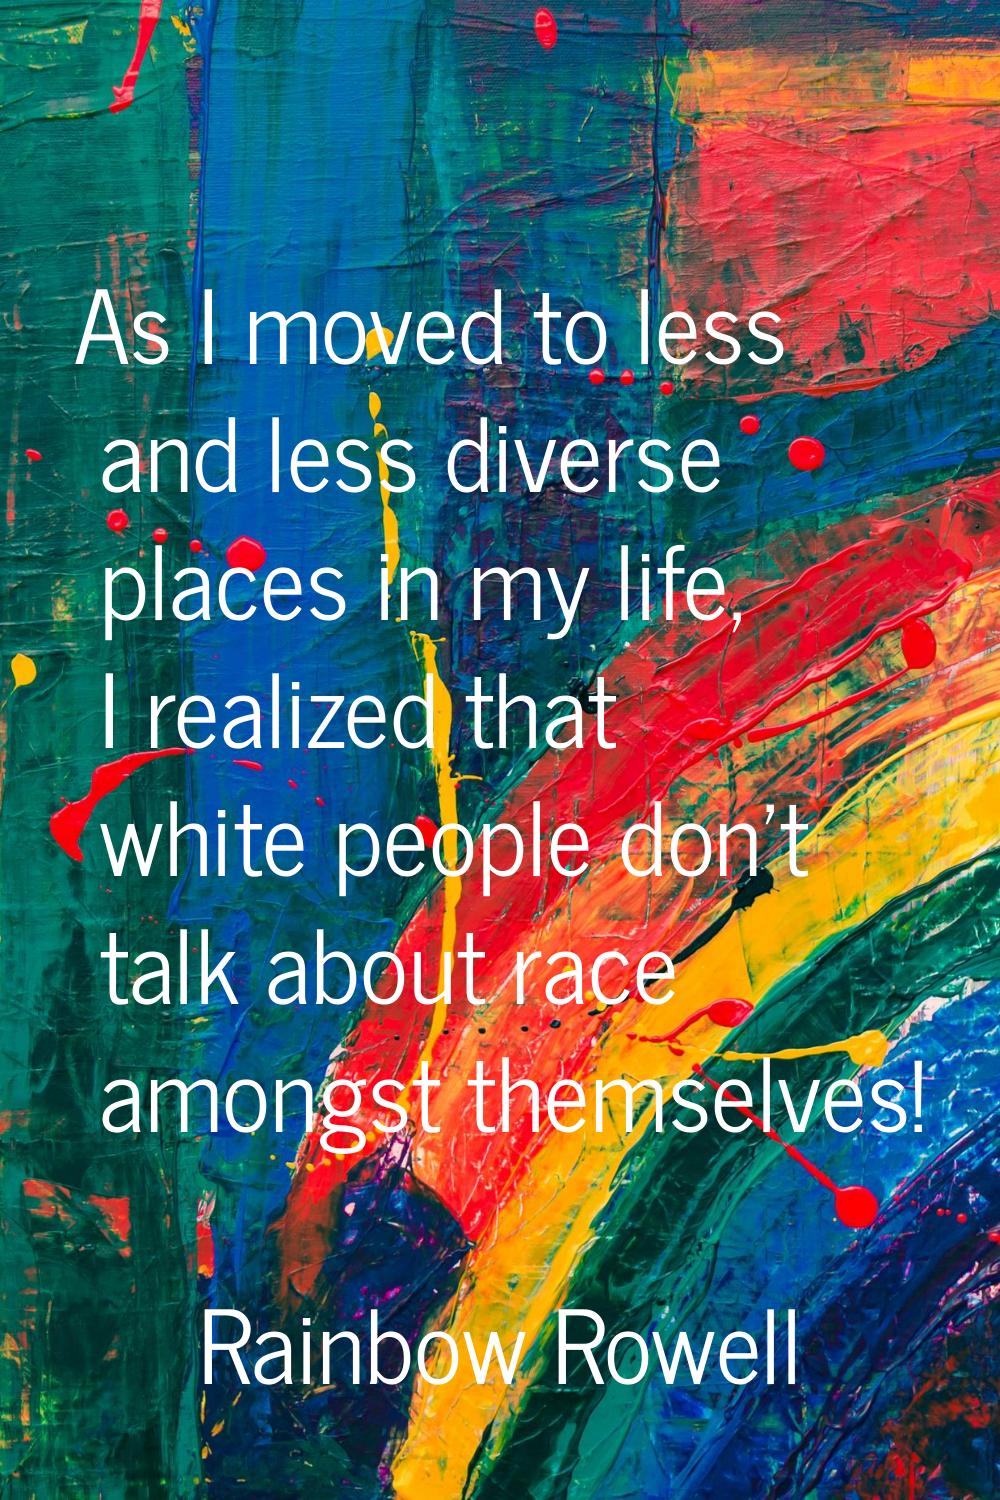 As I moved to less and less diverse places in my life, I realized that white people don't talk abou